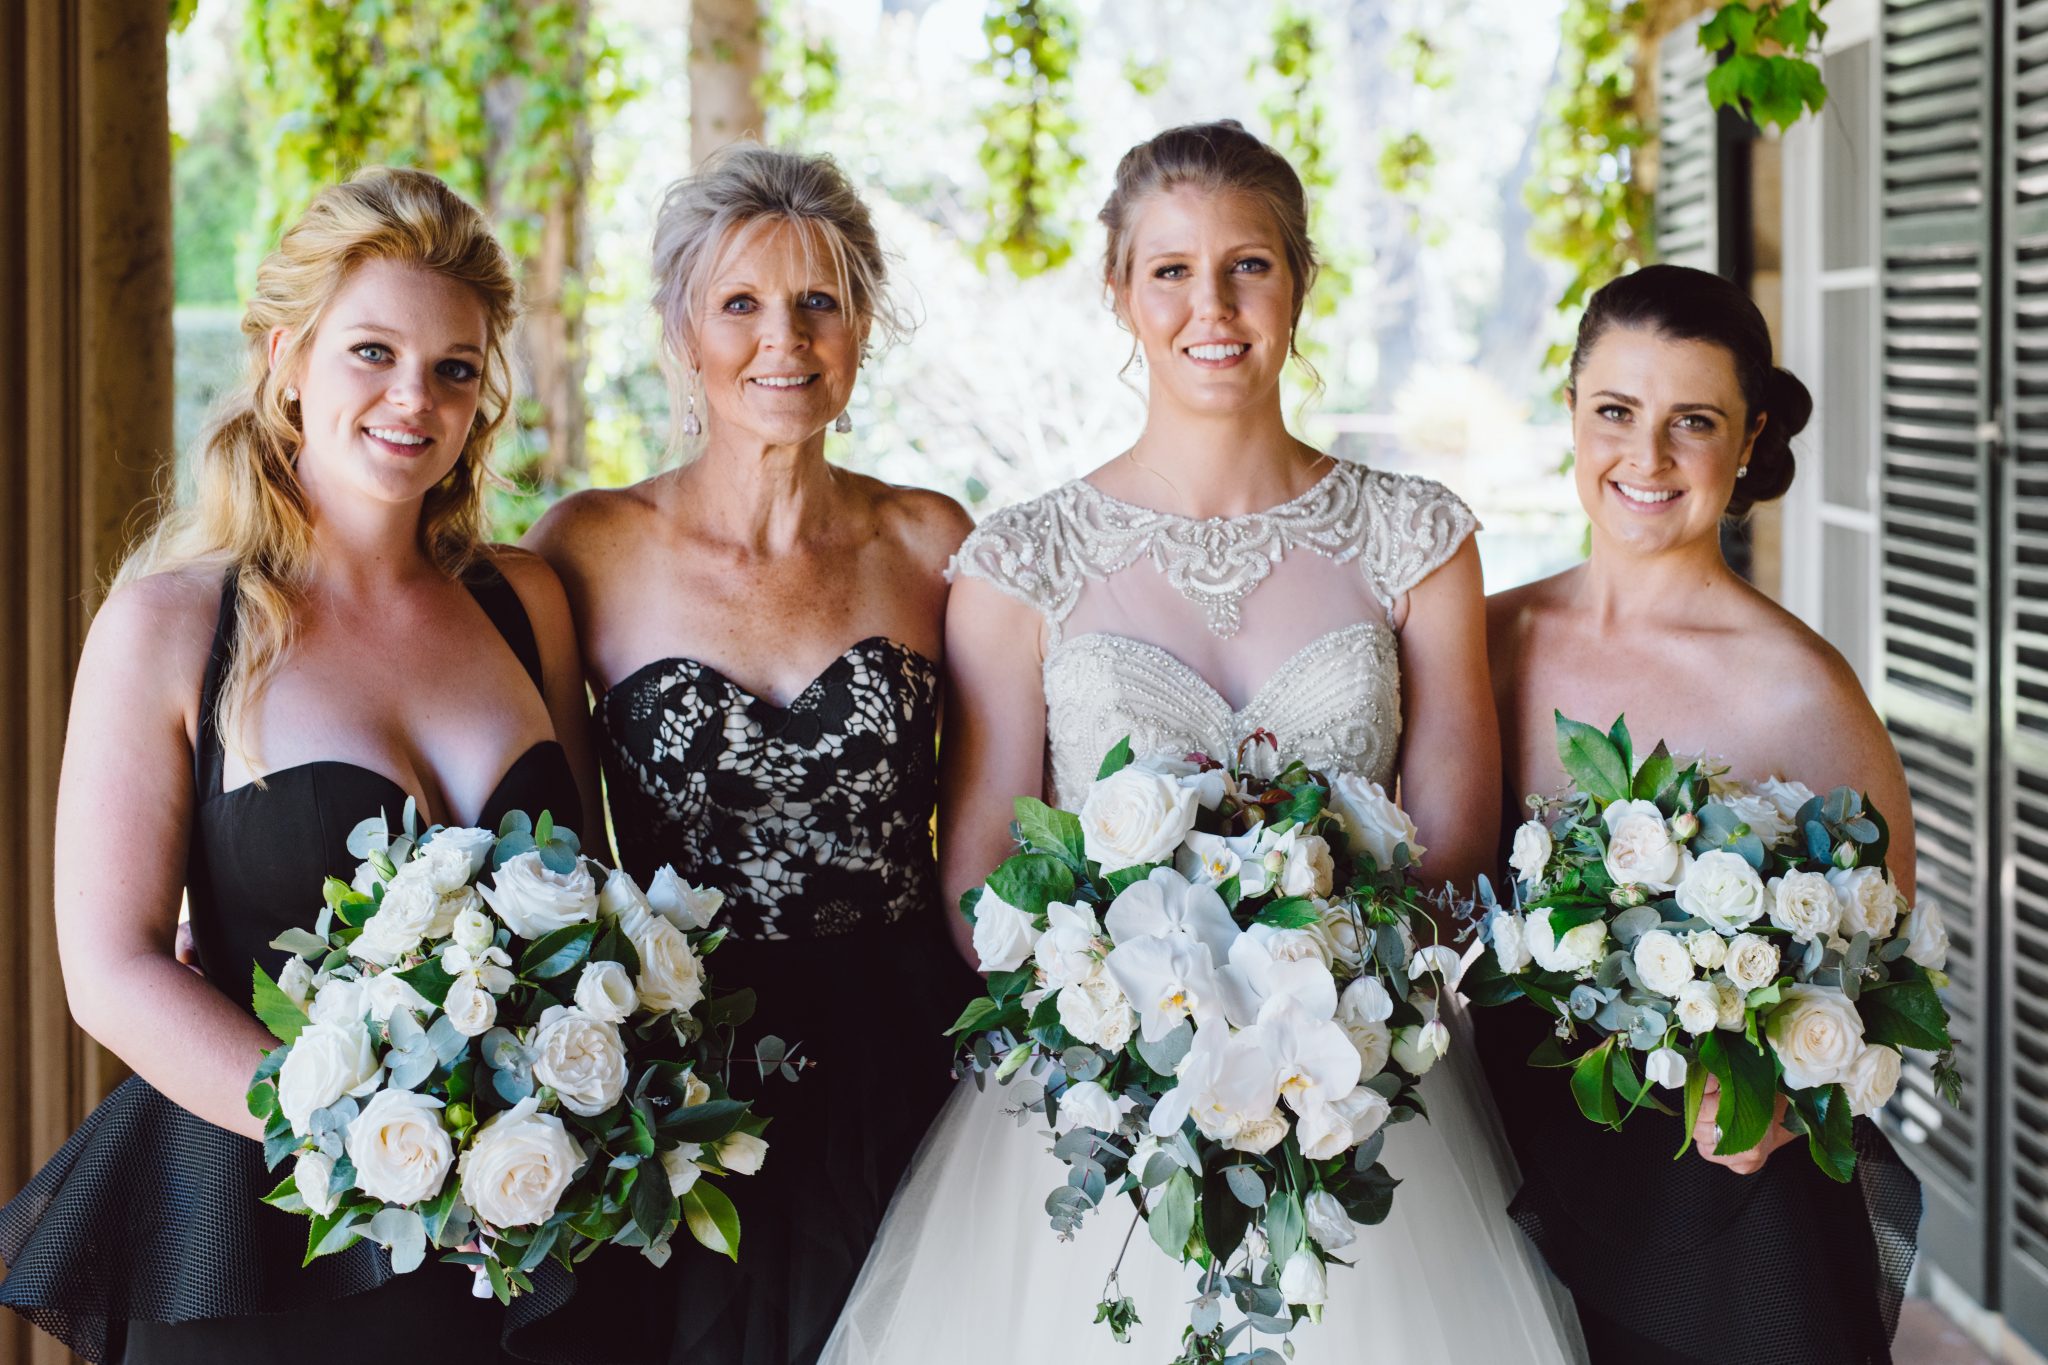 The brides babes - Bridal Party Goals - Decorations by Jelena